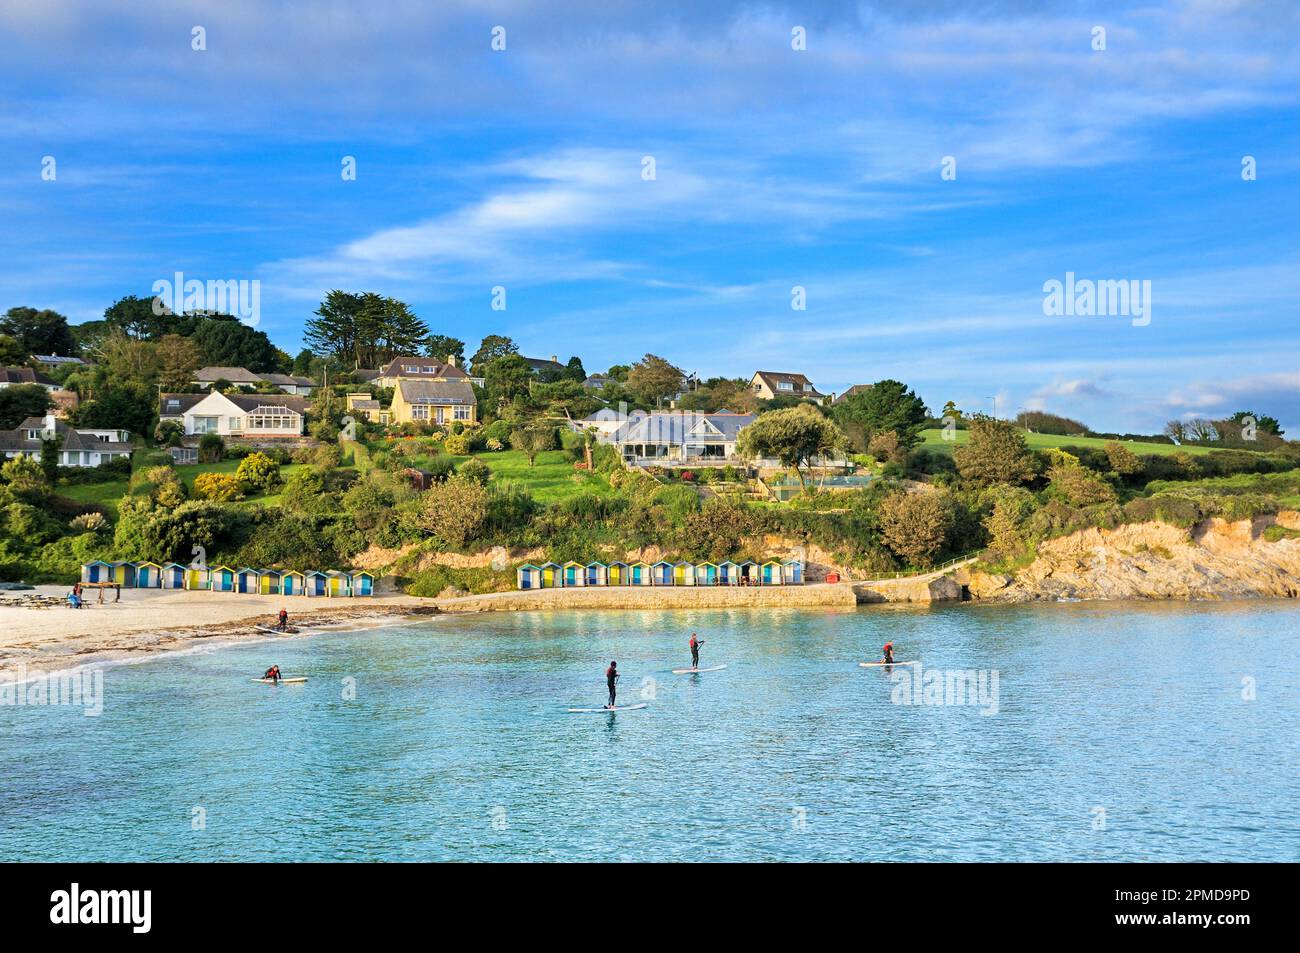 A group of men stand-up paddleboarding (SUP for short) in the calm waters at Swanpool beach in late summer, near Falmouth, Cornwall, England, UK Stock Photo